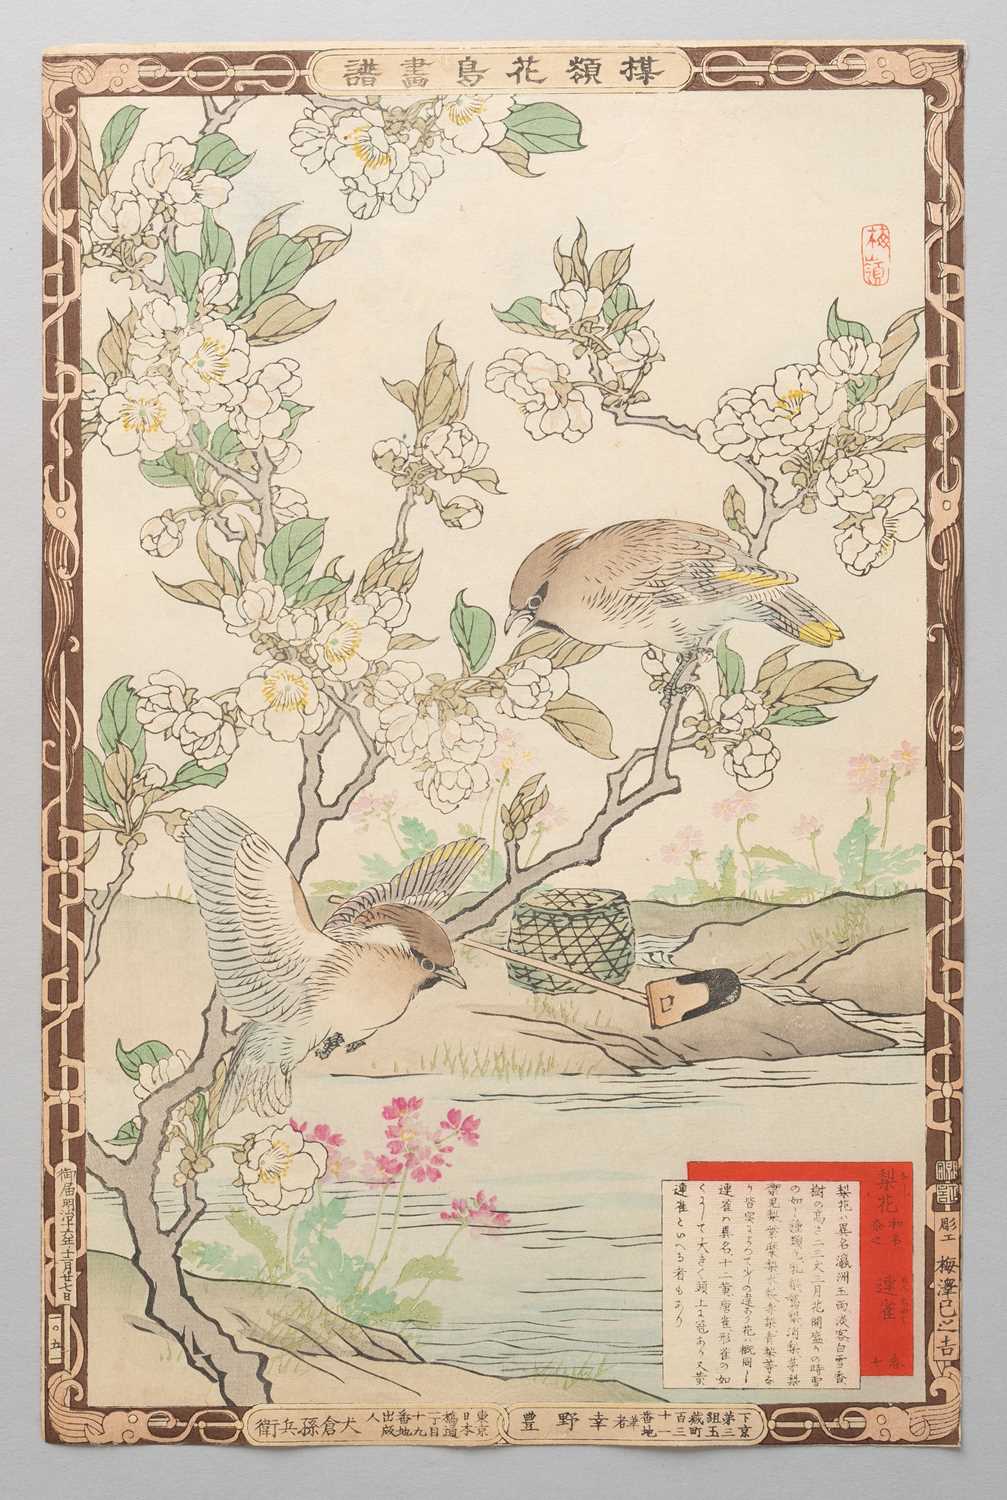 NO RESERVE BAIREI KONO (1844-95) MEIJI ERA, 19TH CENTURY A collection of thirty Japanese woodblock - Image 25 of 30